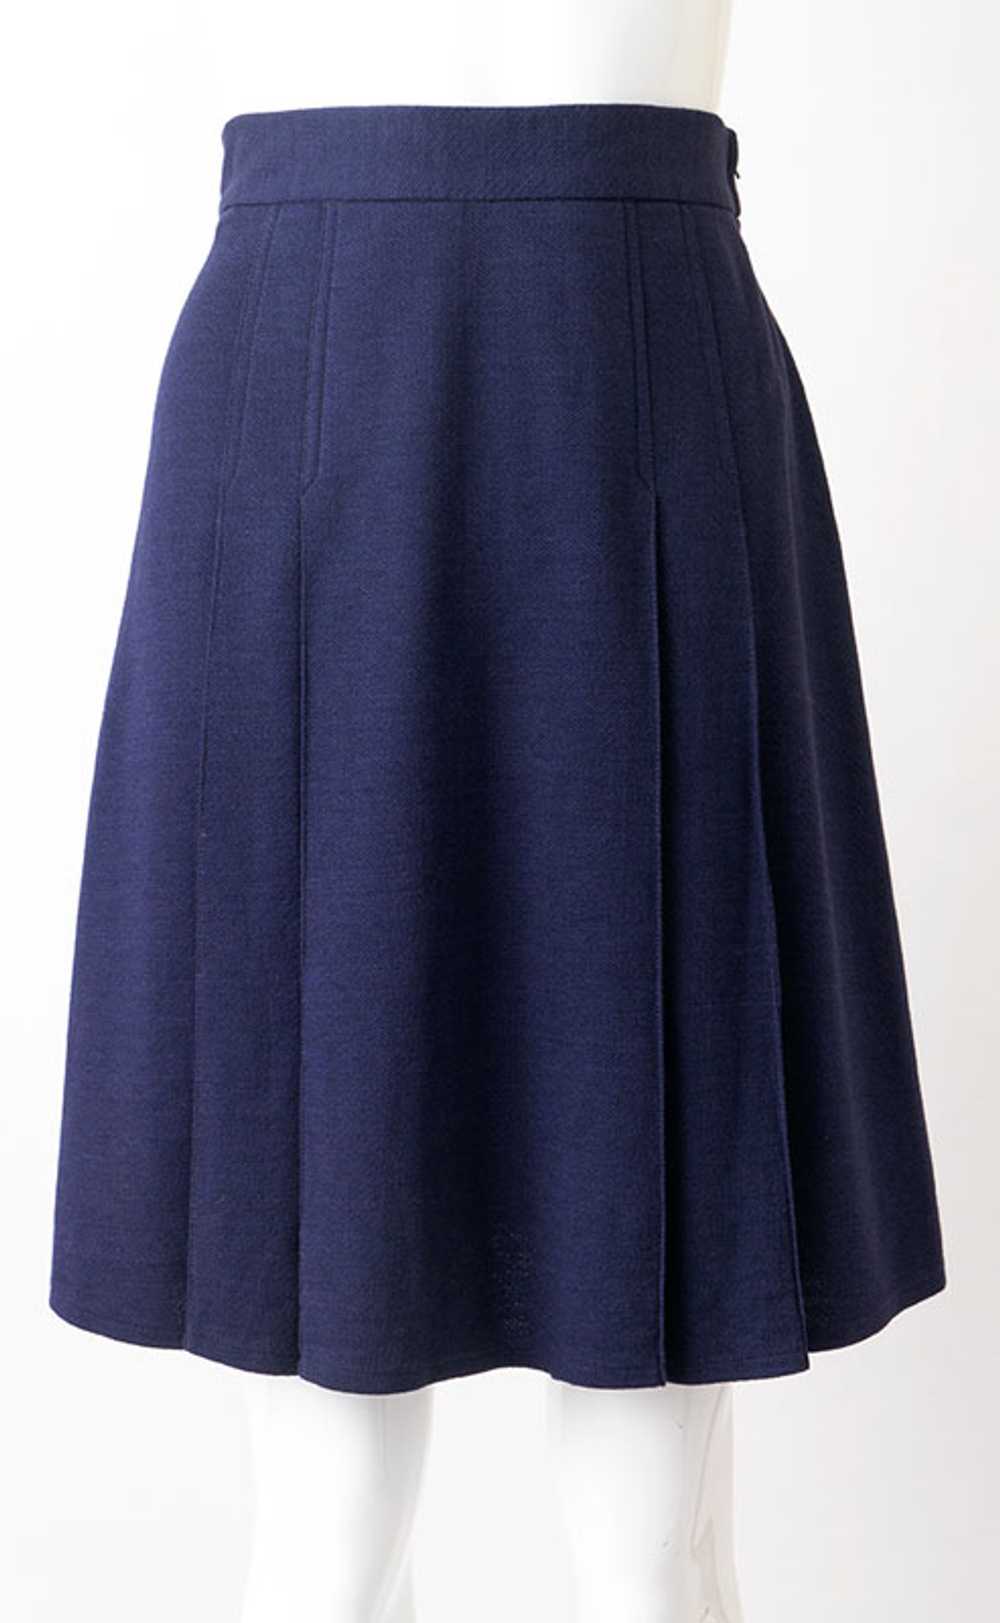 Chic 1970s Boutique Skirt - image 1